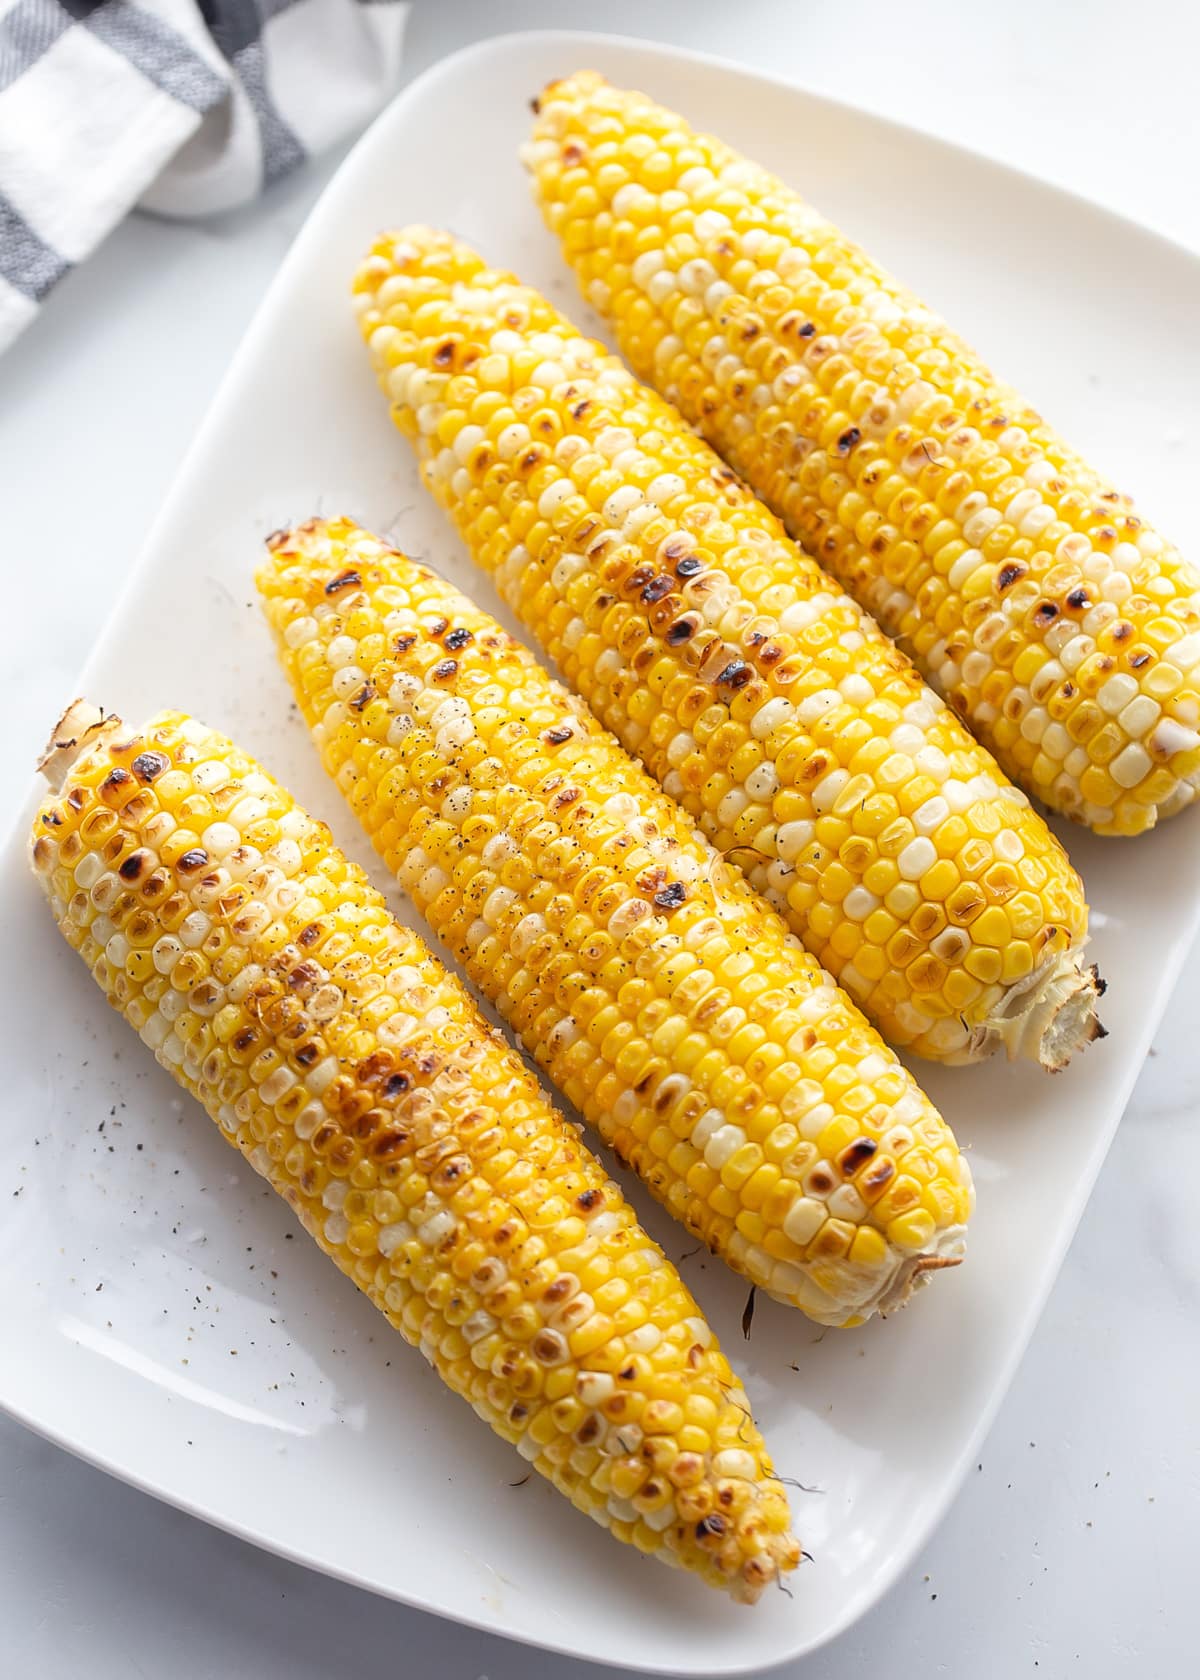 Seasoned grilled corn on the cob served on a white plate.